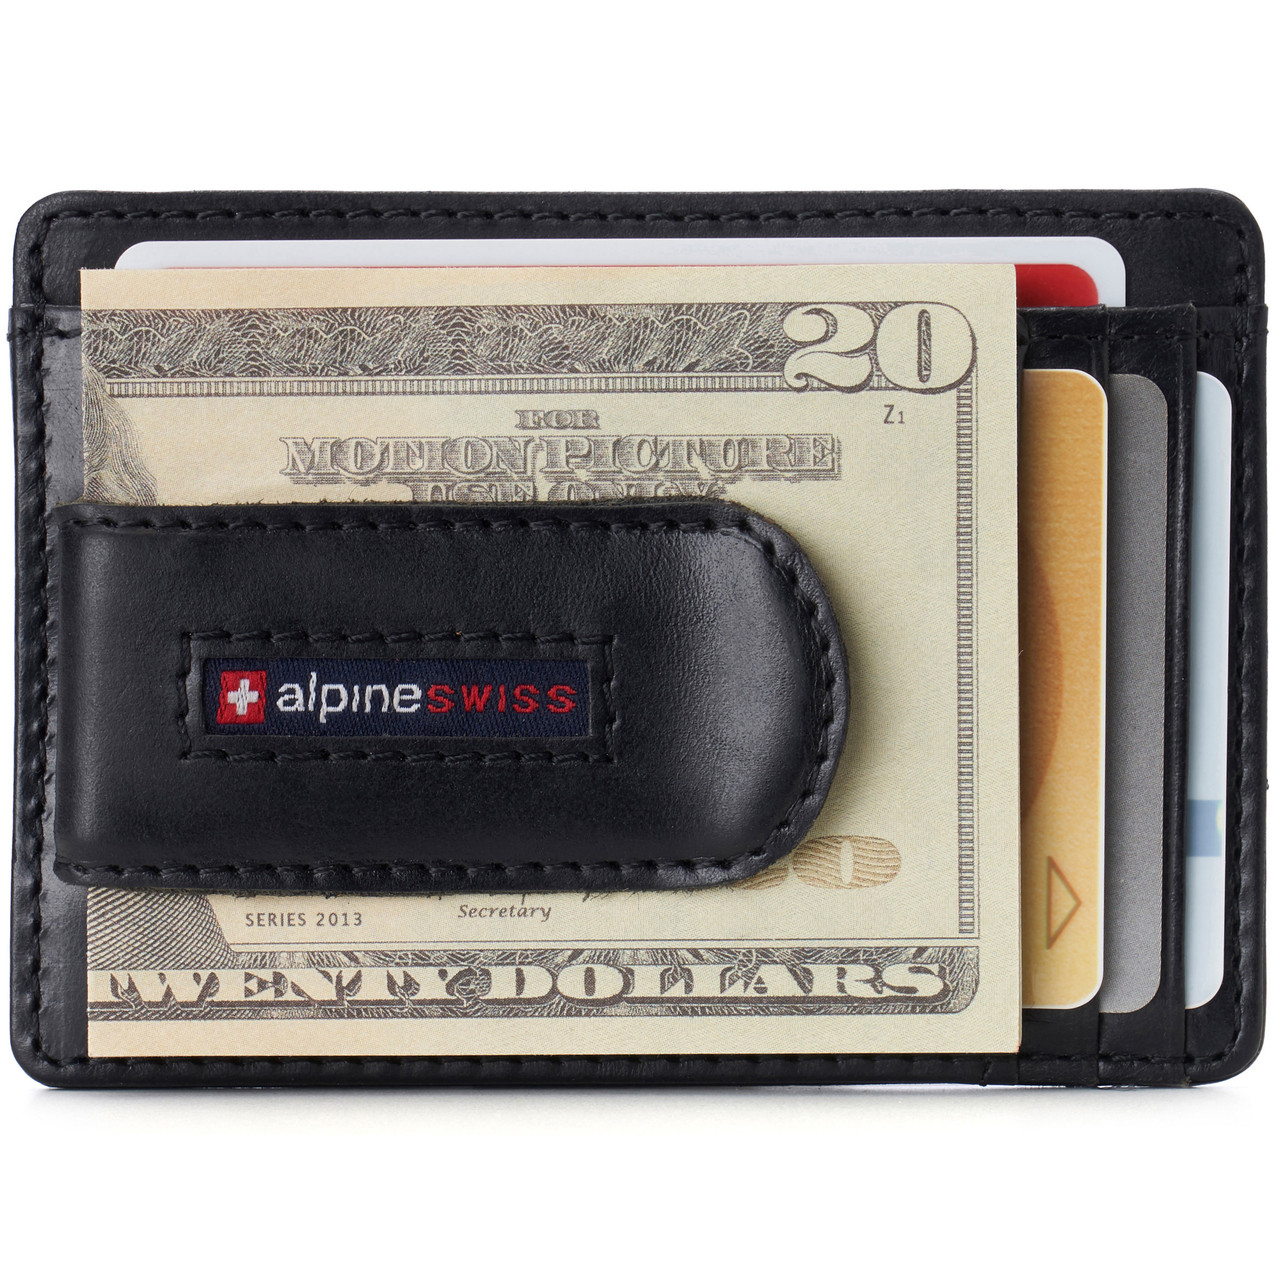 Leather Money Clip Wallet. Mens Wallet With Money Clip. Slim 